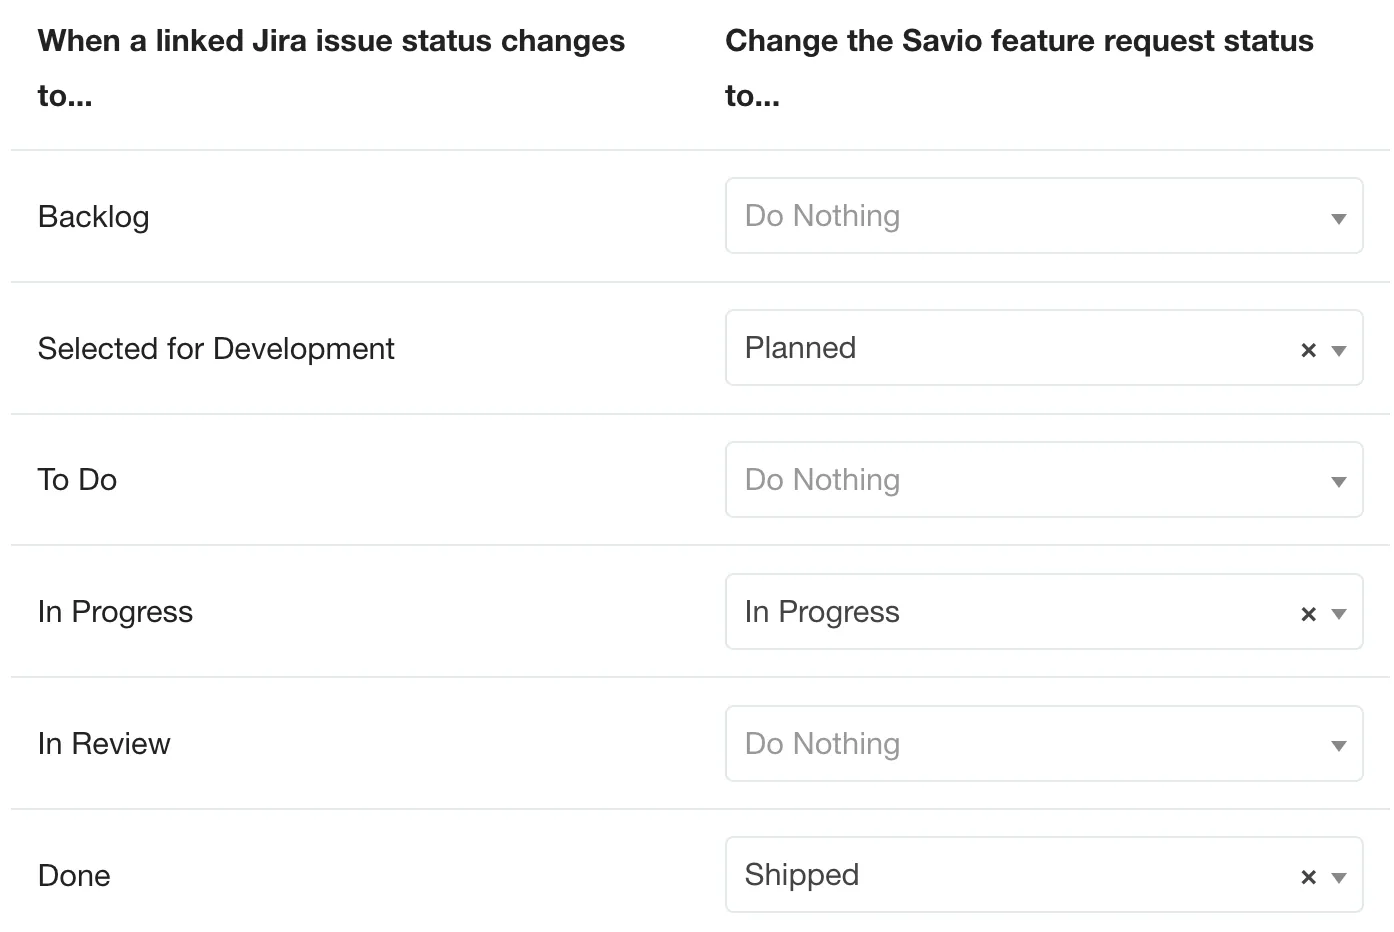 Automatically update feature request status based on JIRA issue state